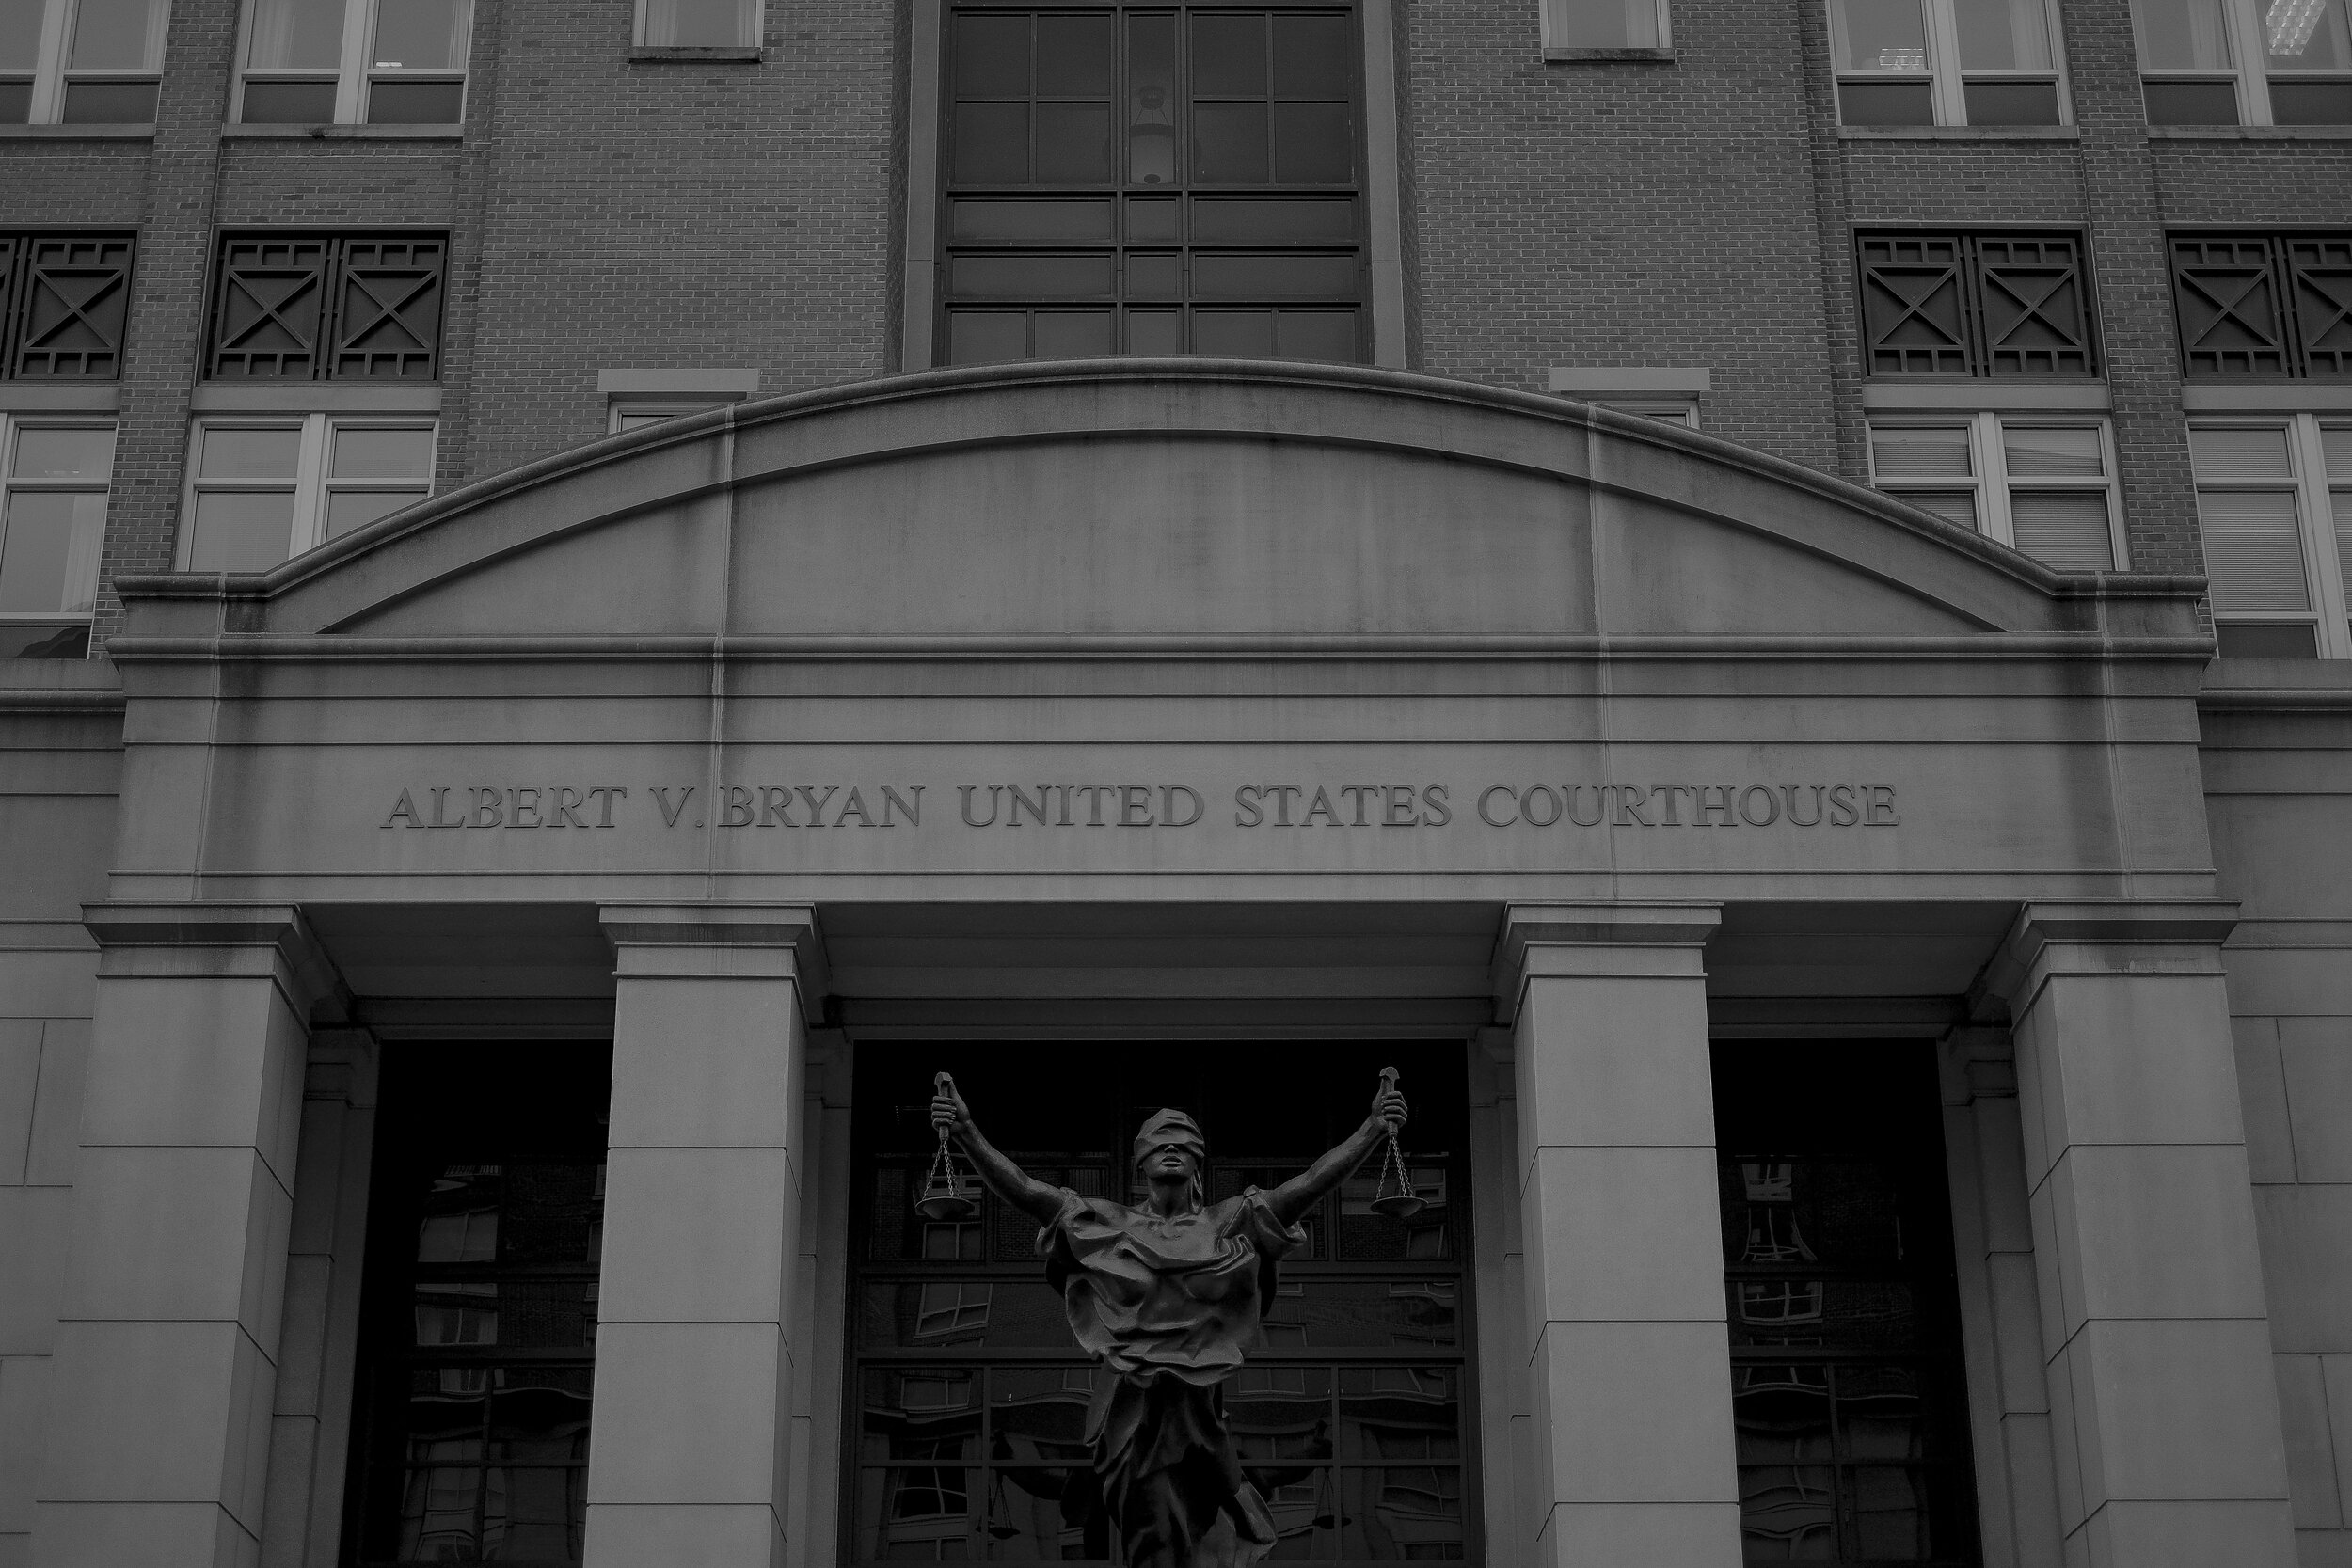  7/31/18, U.S. District Courthouse, Alexandria, Va. The Albert V. Bryan United States Courthouse building on the first day of Paul Manafort's trial in Alexandria, Va., on July 31, 2018. Gabriella Demczuk / The New York Times 